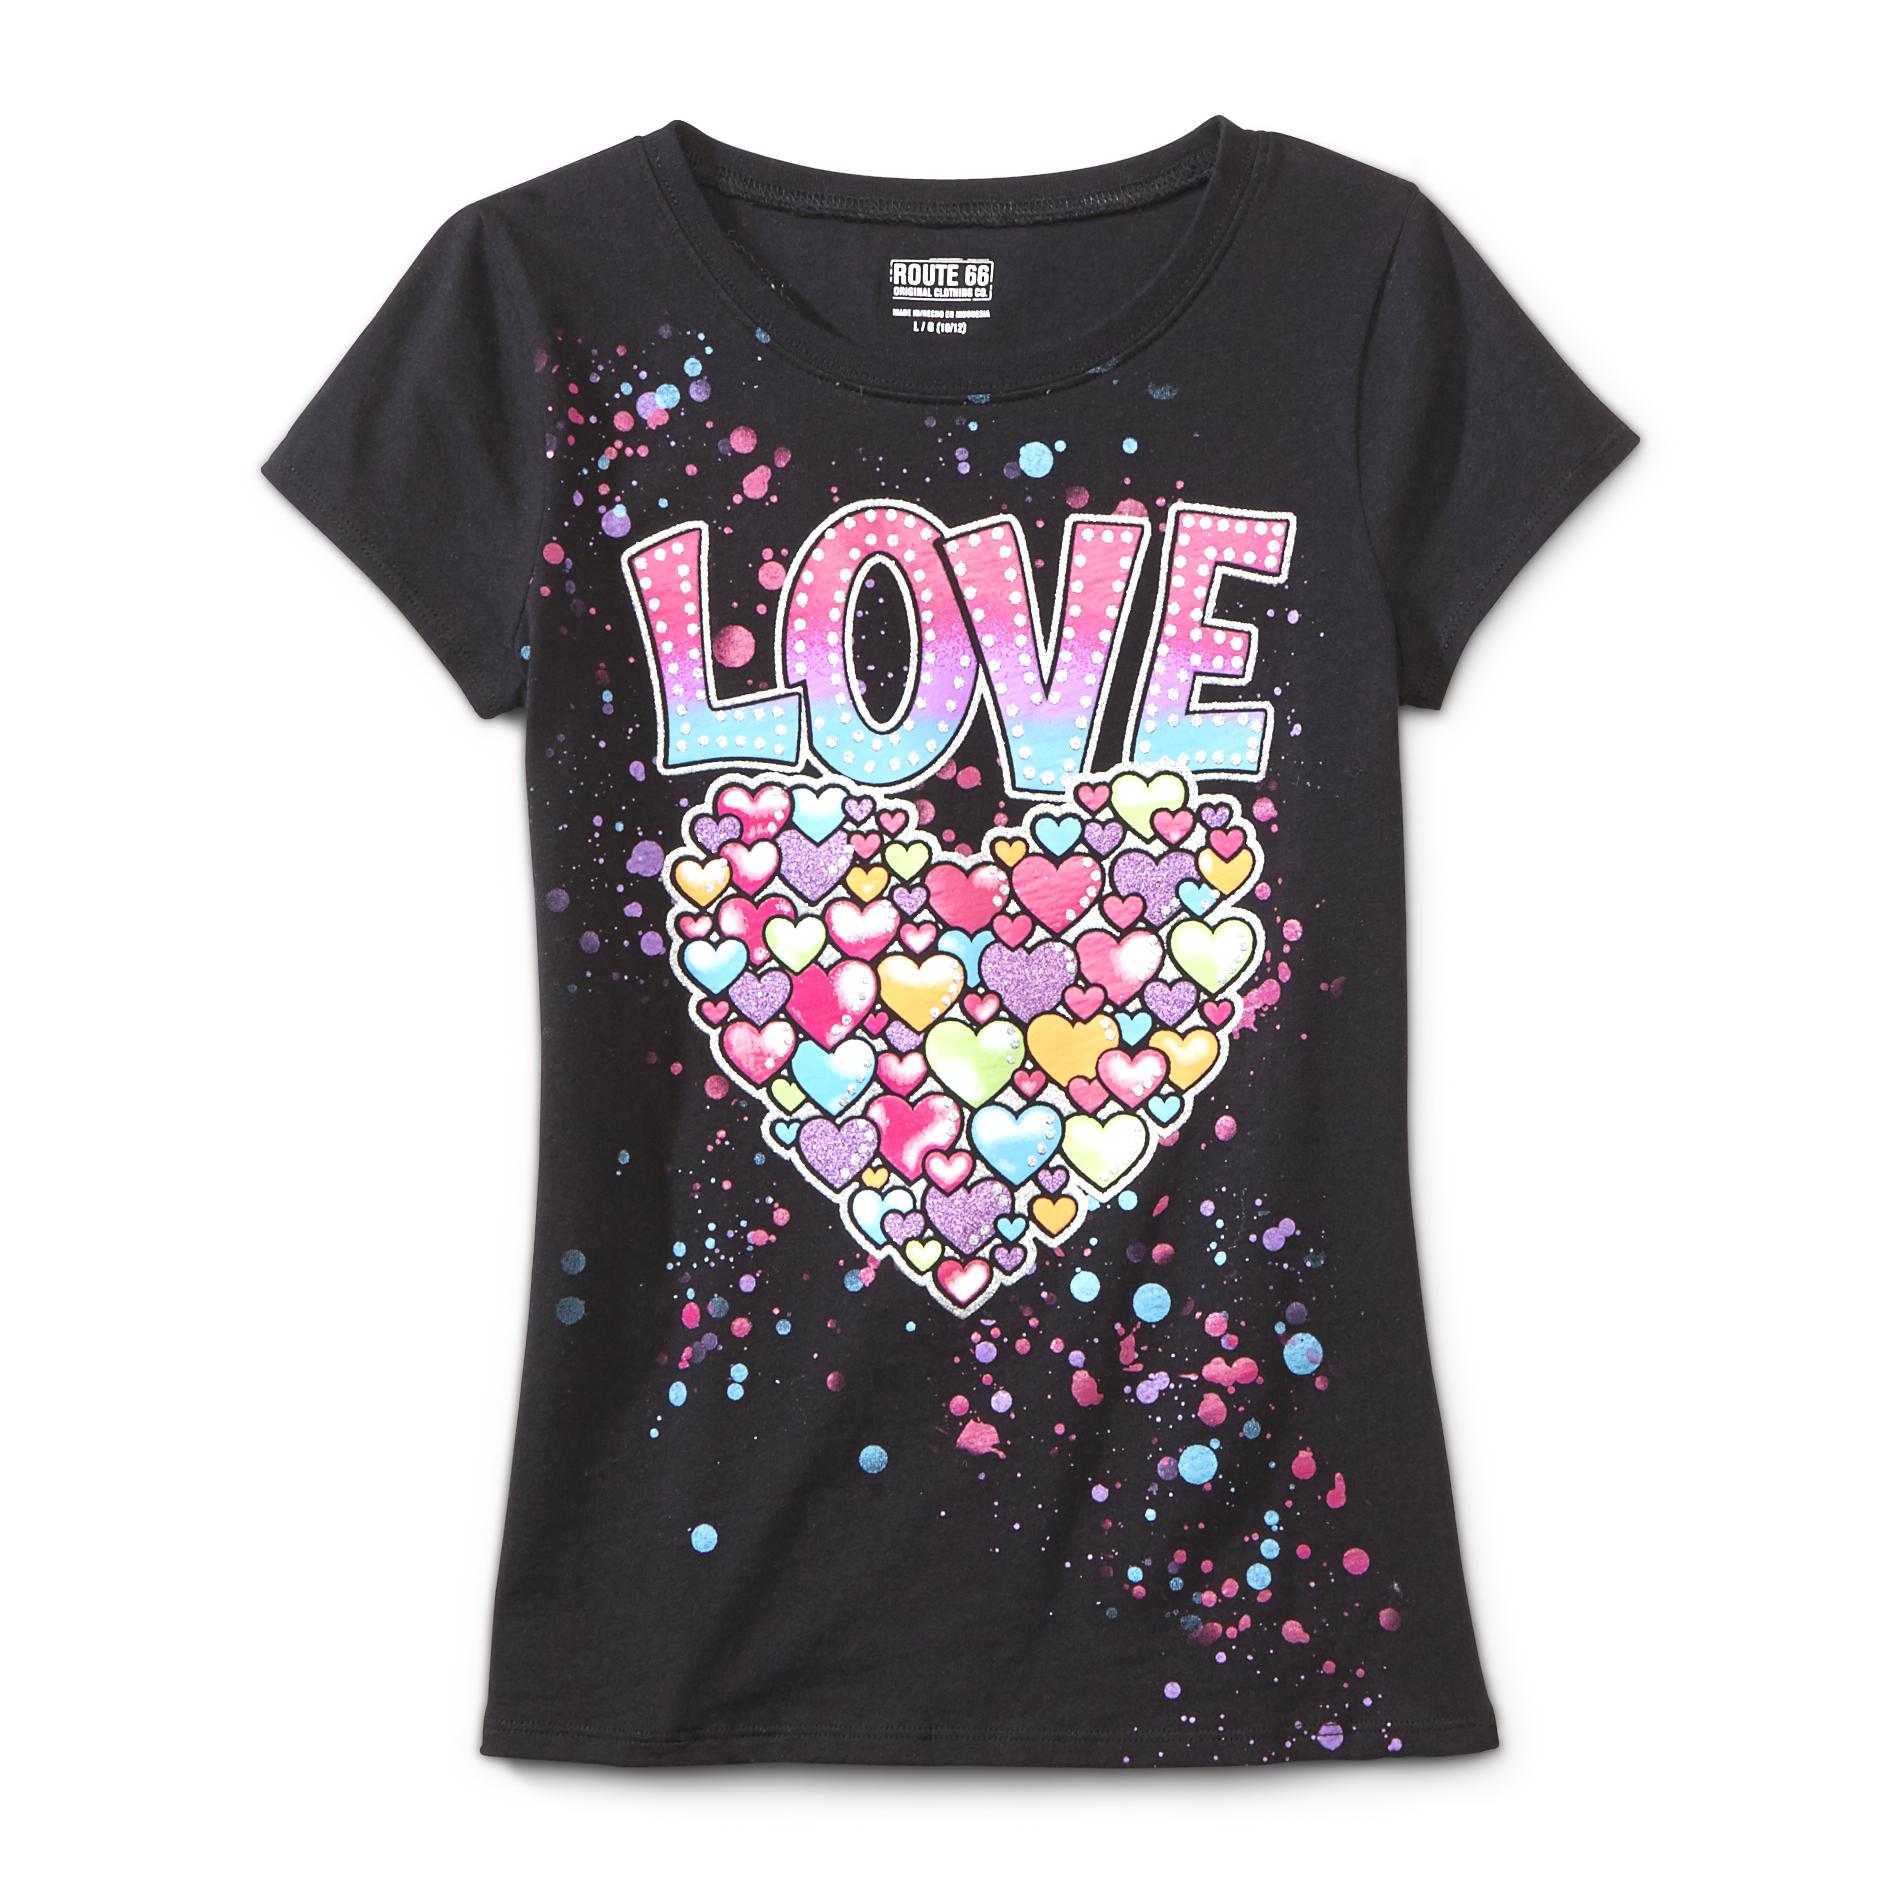 Route 66 Girl's Graphic T-Shirt - Love